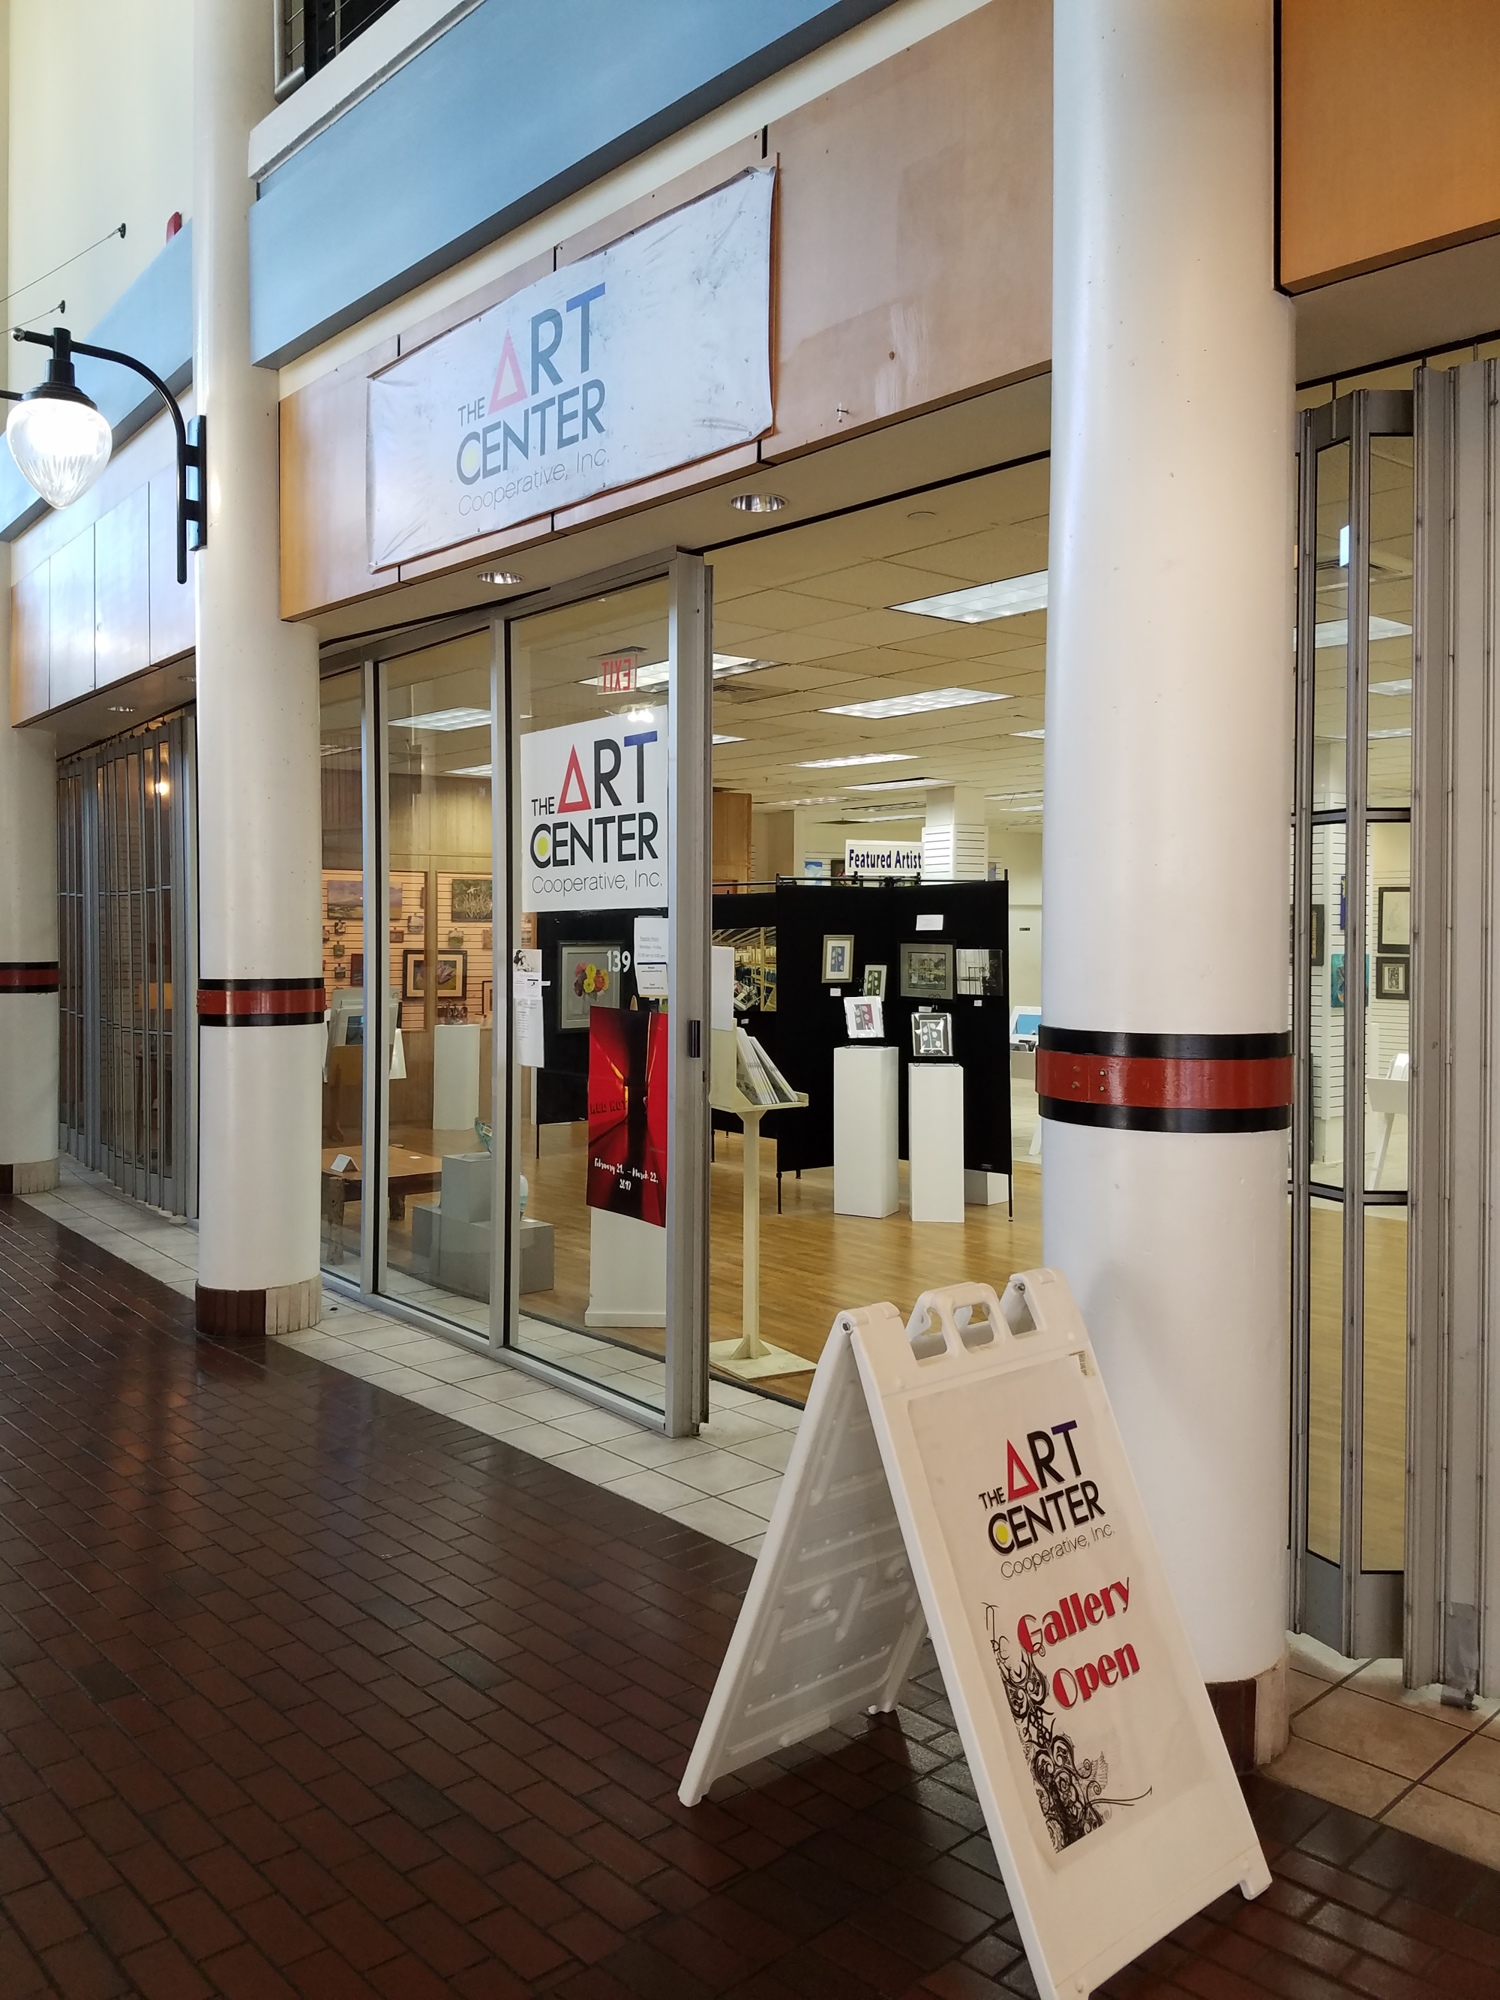 The Art Center is paying $2 to $3 per square foot for its space in The Jacksonville Landing.